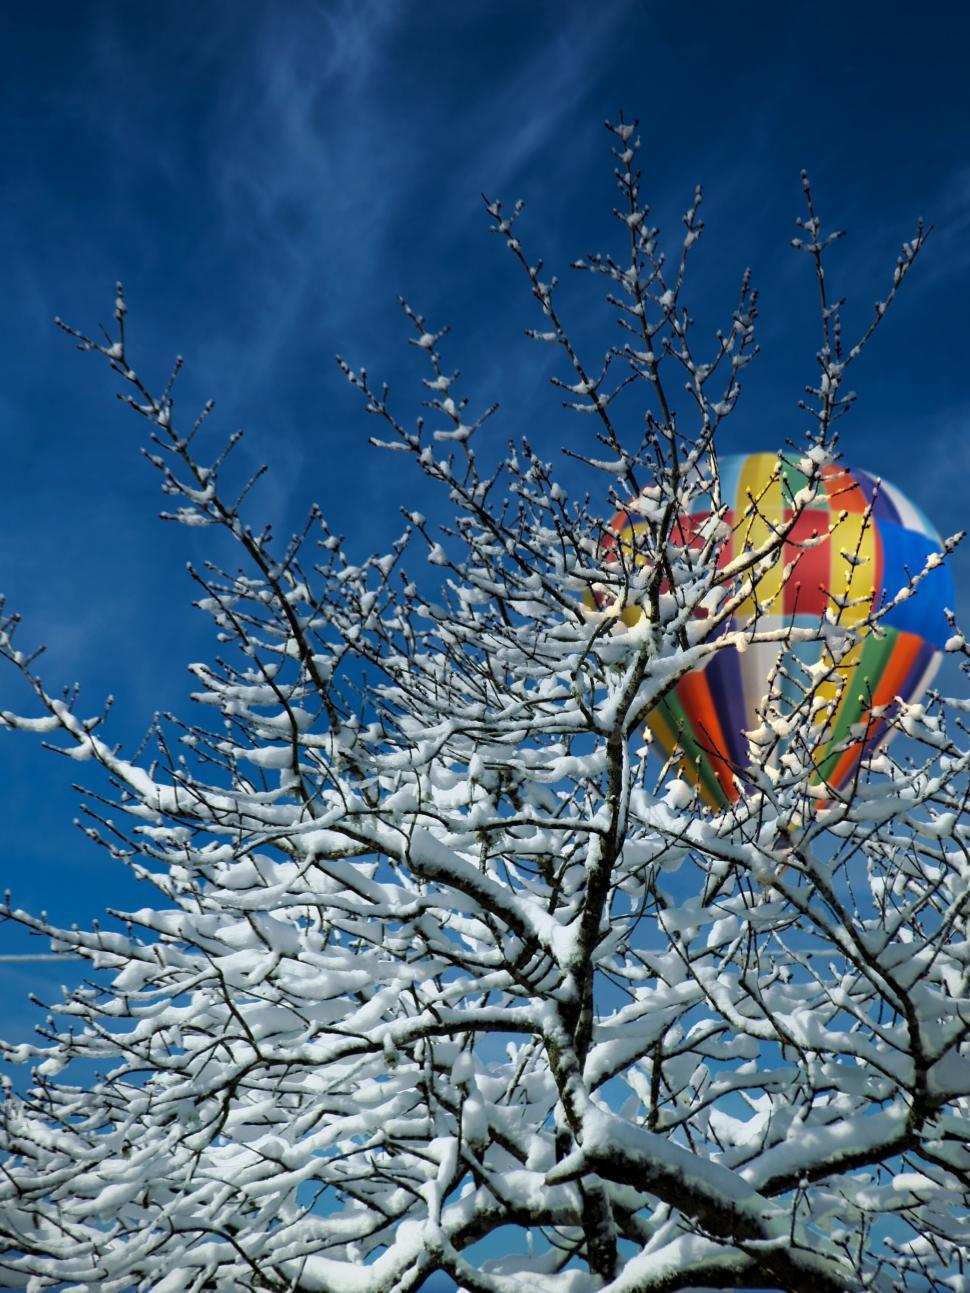 Free Image of Hot air balloon over snow-covered trees 